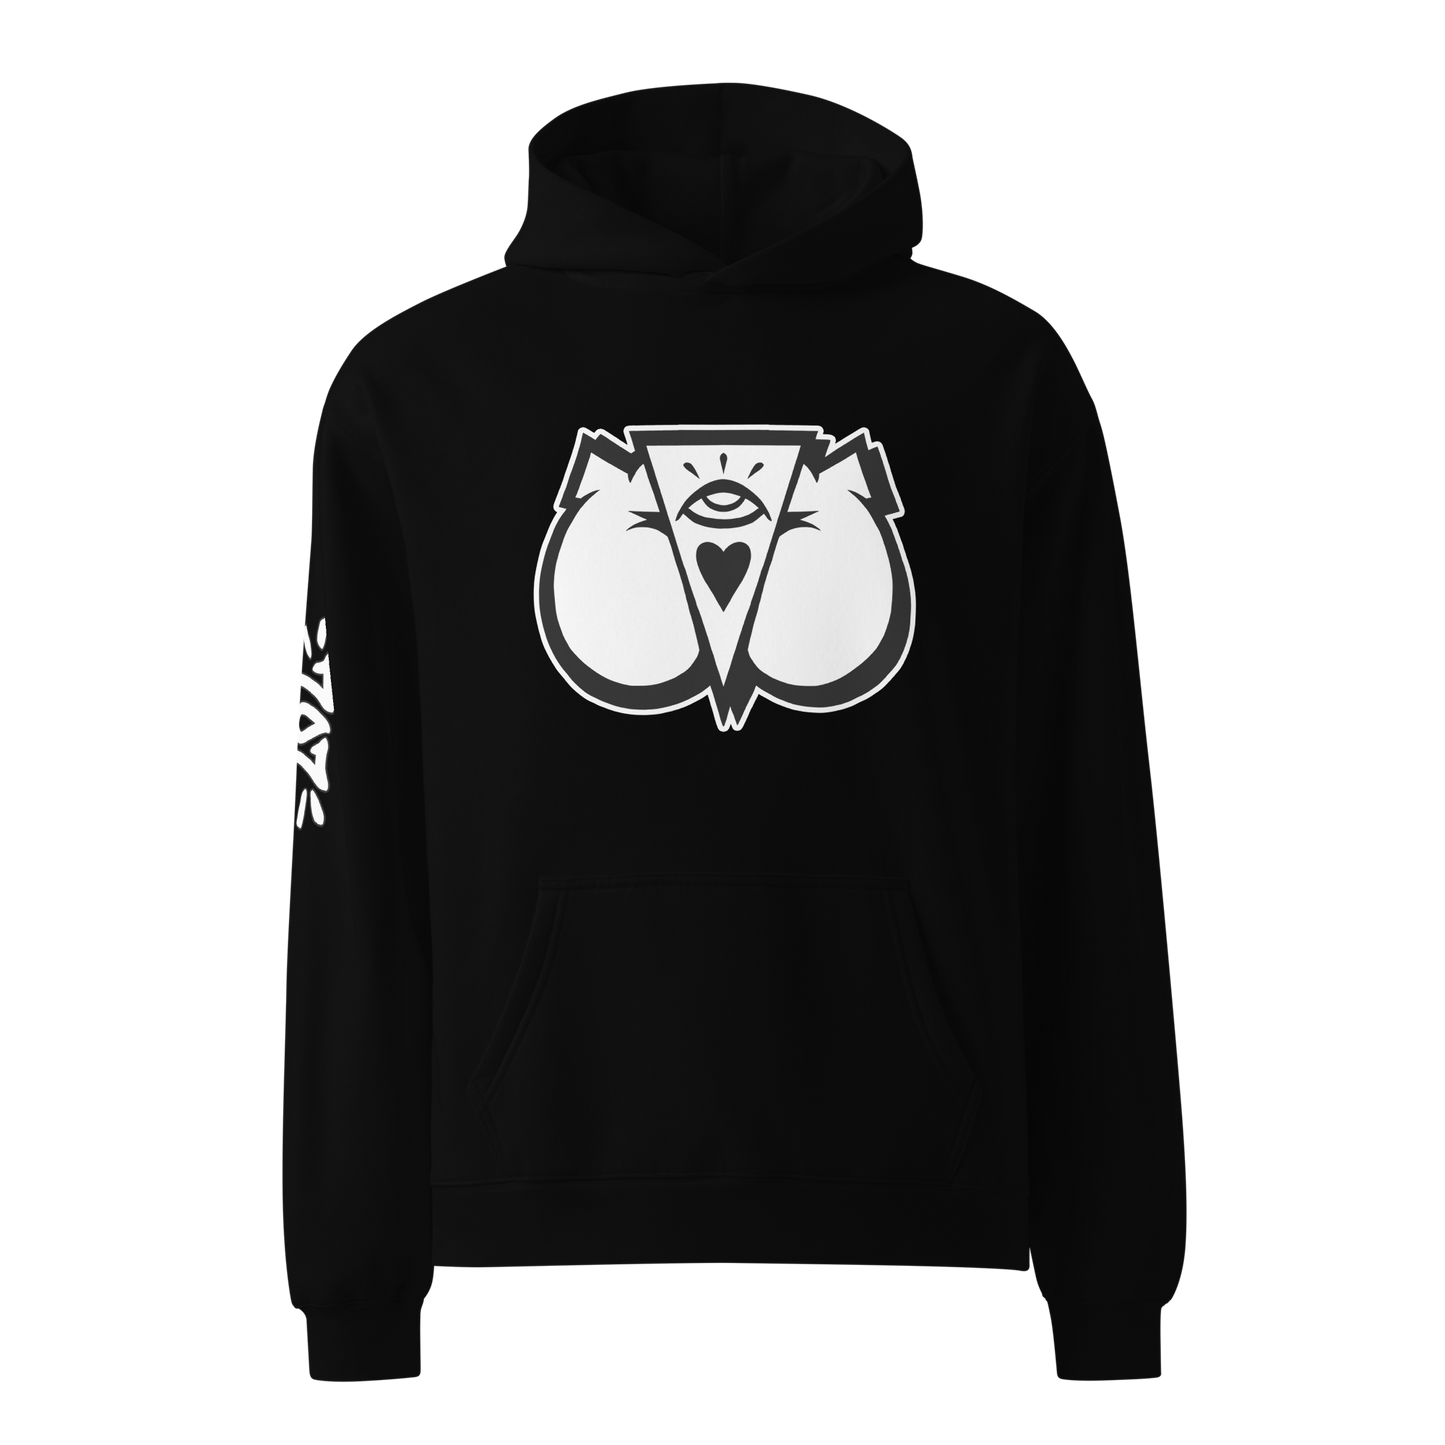 EY3 white fill hoodie